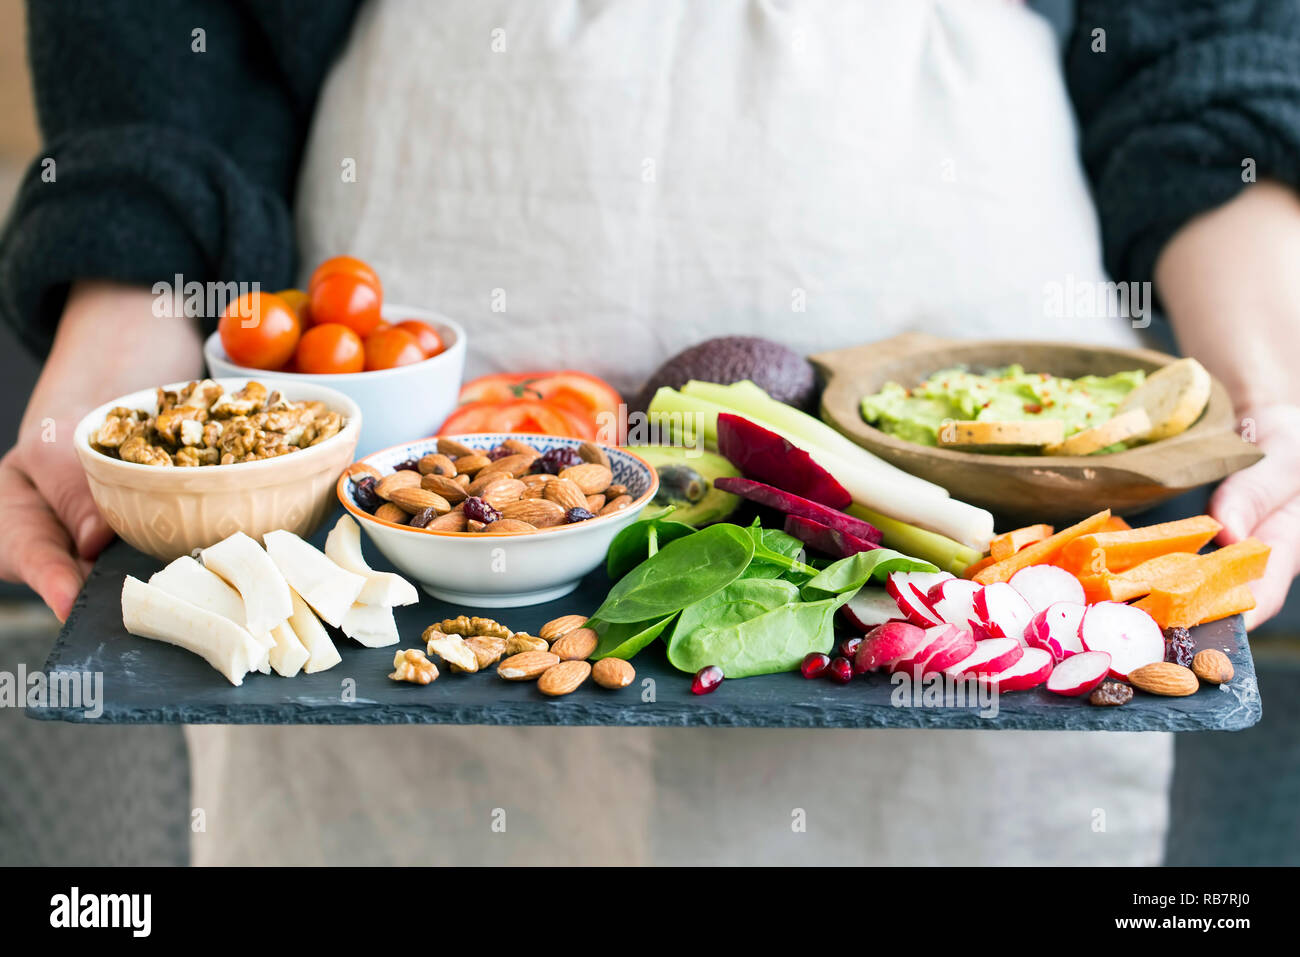 Woman holding healthy meal selection of clean organic foods: vegetables, nuts, avocado, almonds, green leaves Stock Photo